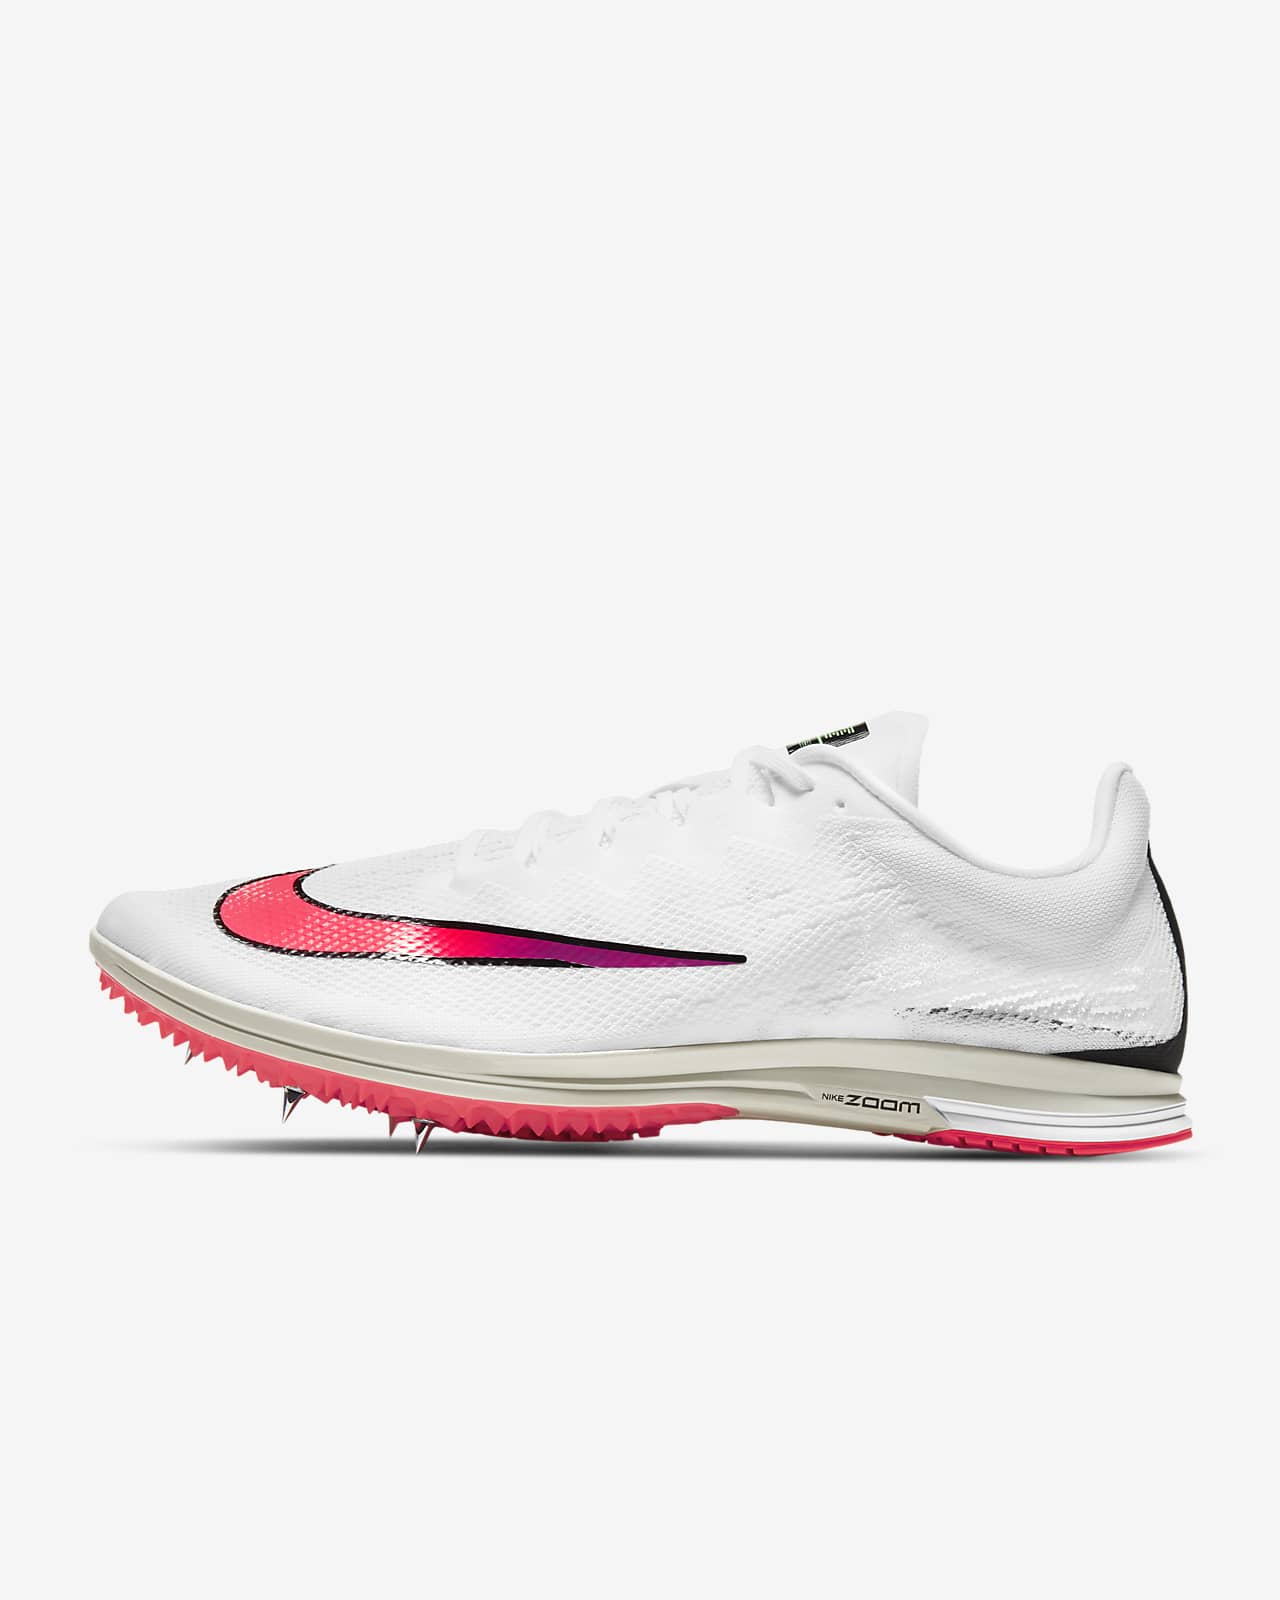 nike zoom vaporfly spikes